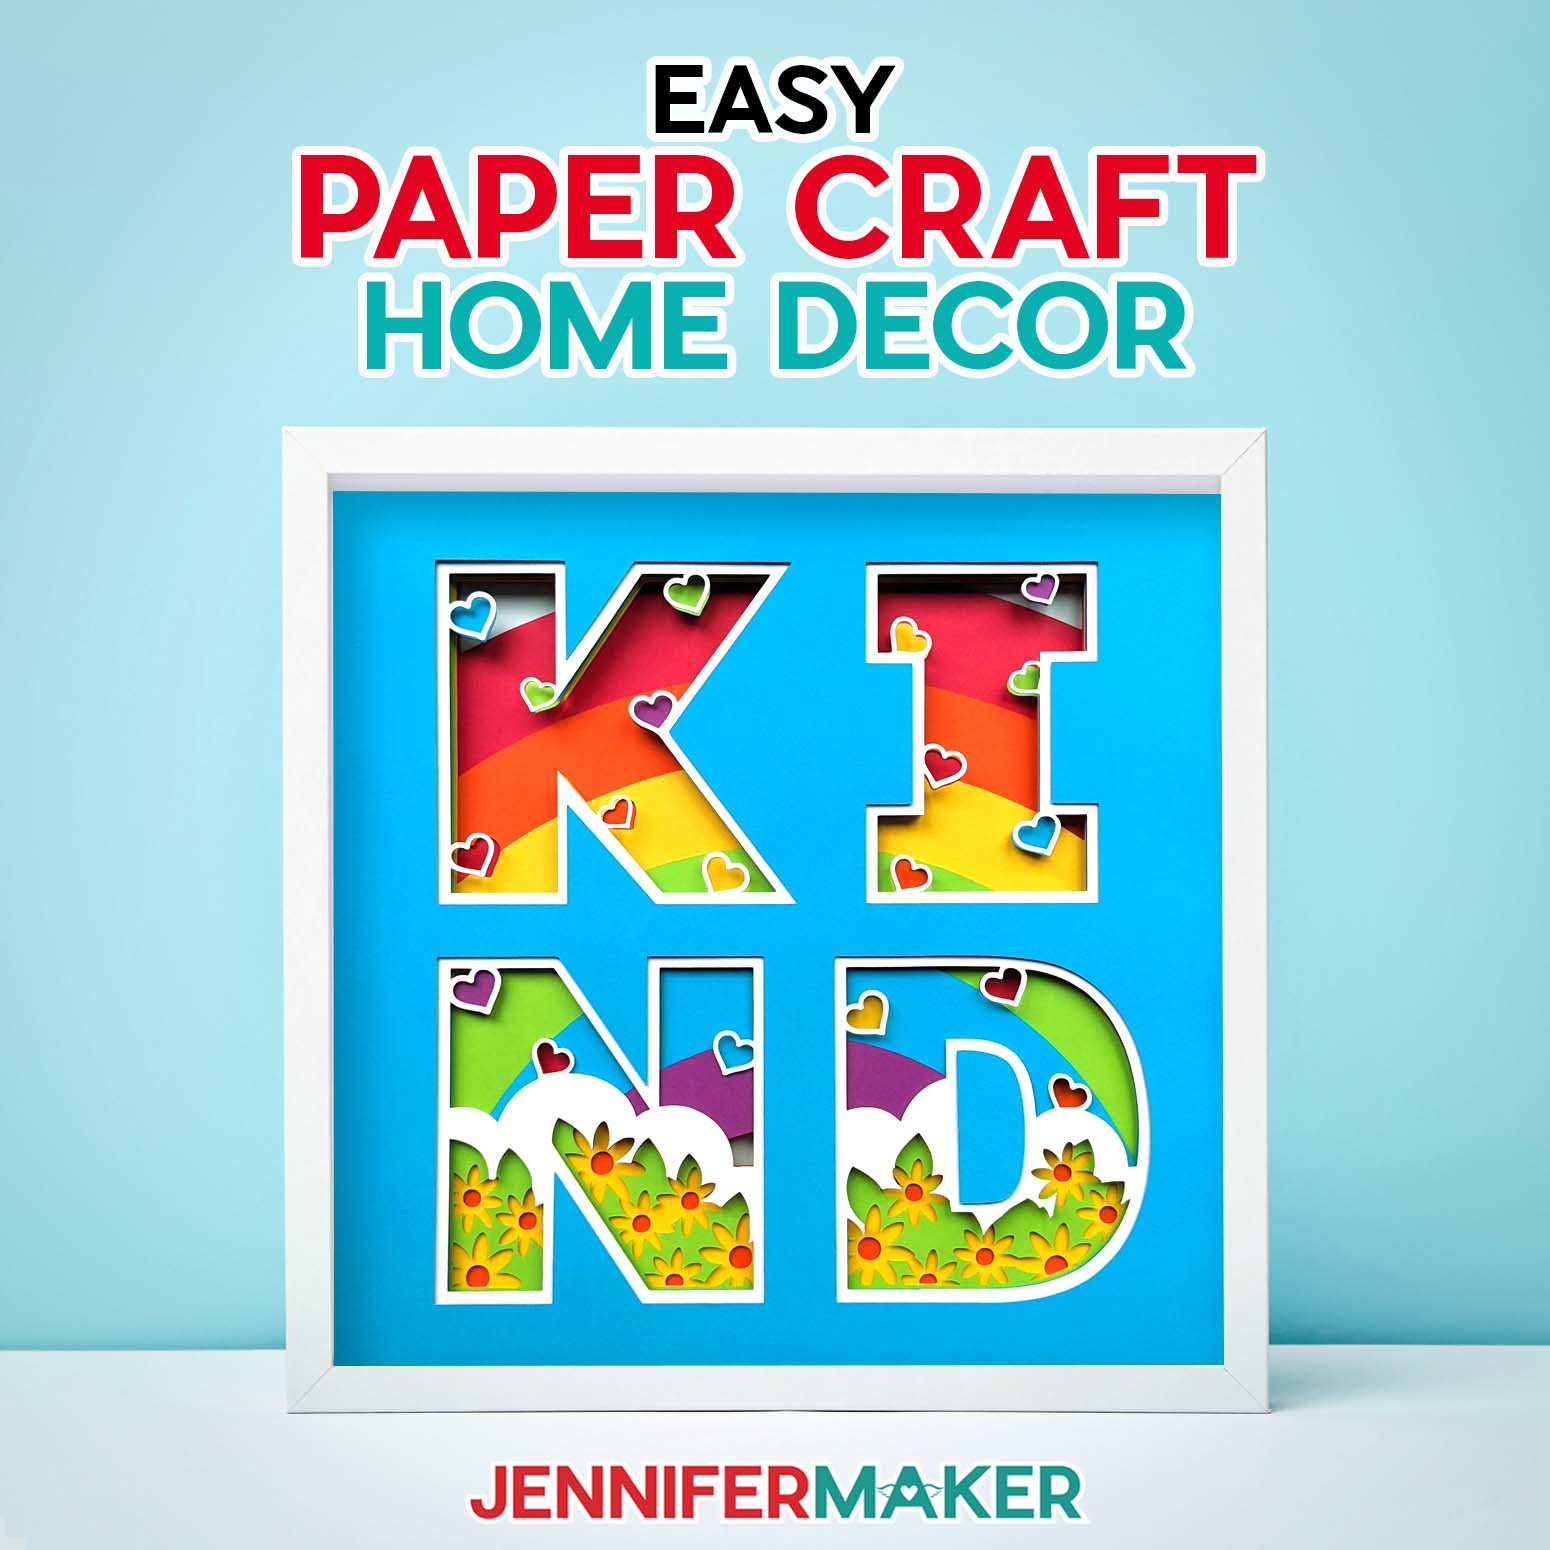 Paper Craft Home Decor Ideas: Easy Wall Hanging Crafts